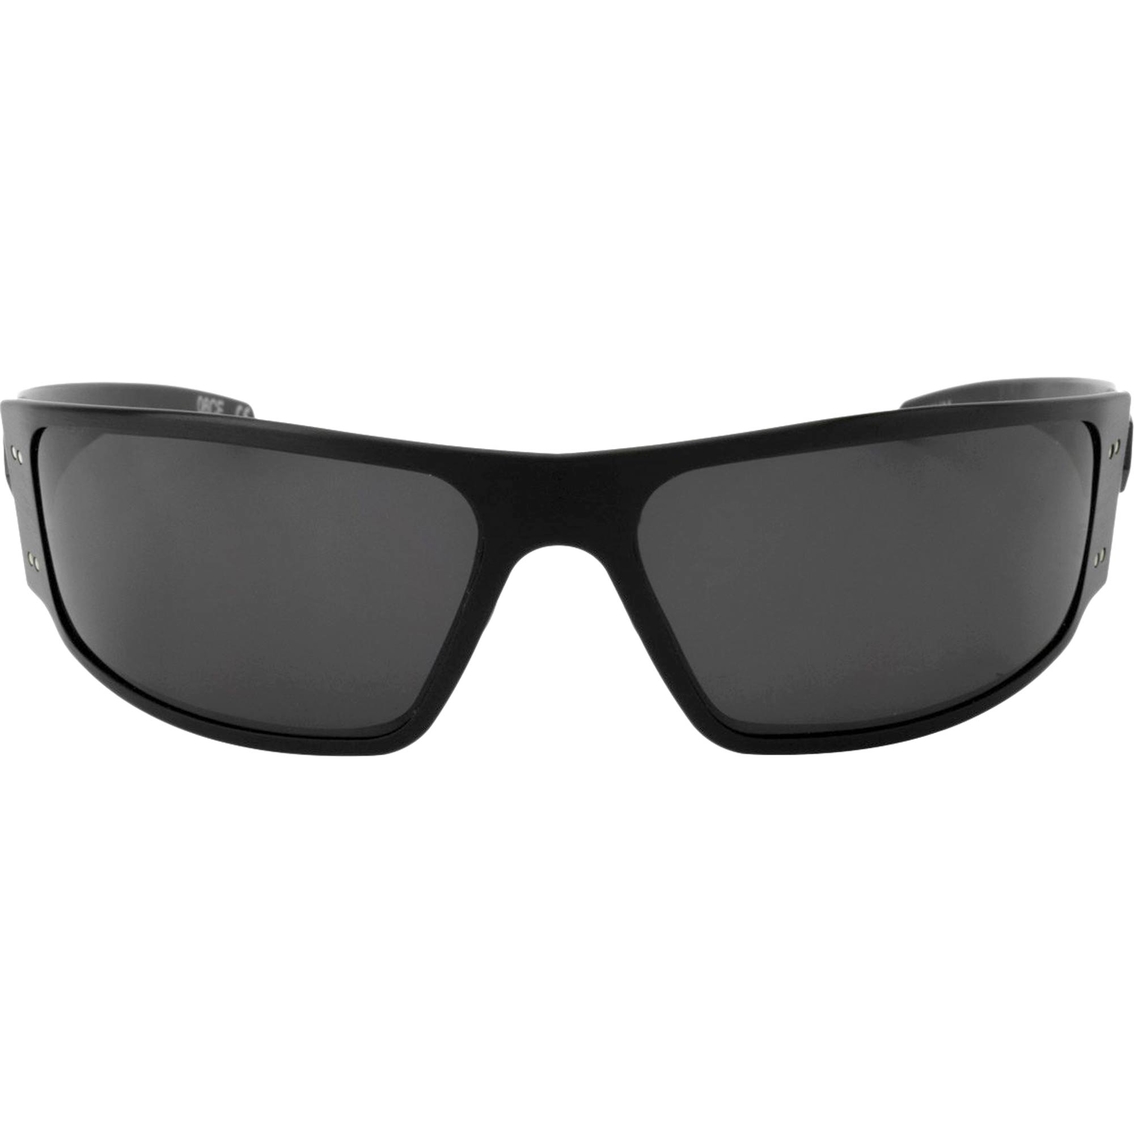 Gatorz Blackout Magnum Smoked Polarized Sunglasses Magblk01mbp, Sunglasses, Clothing & Accessories